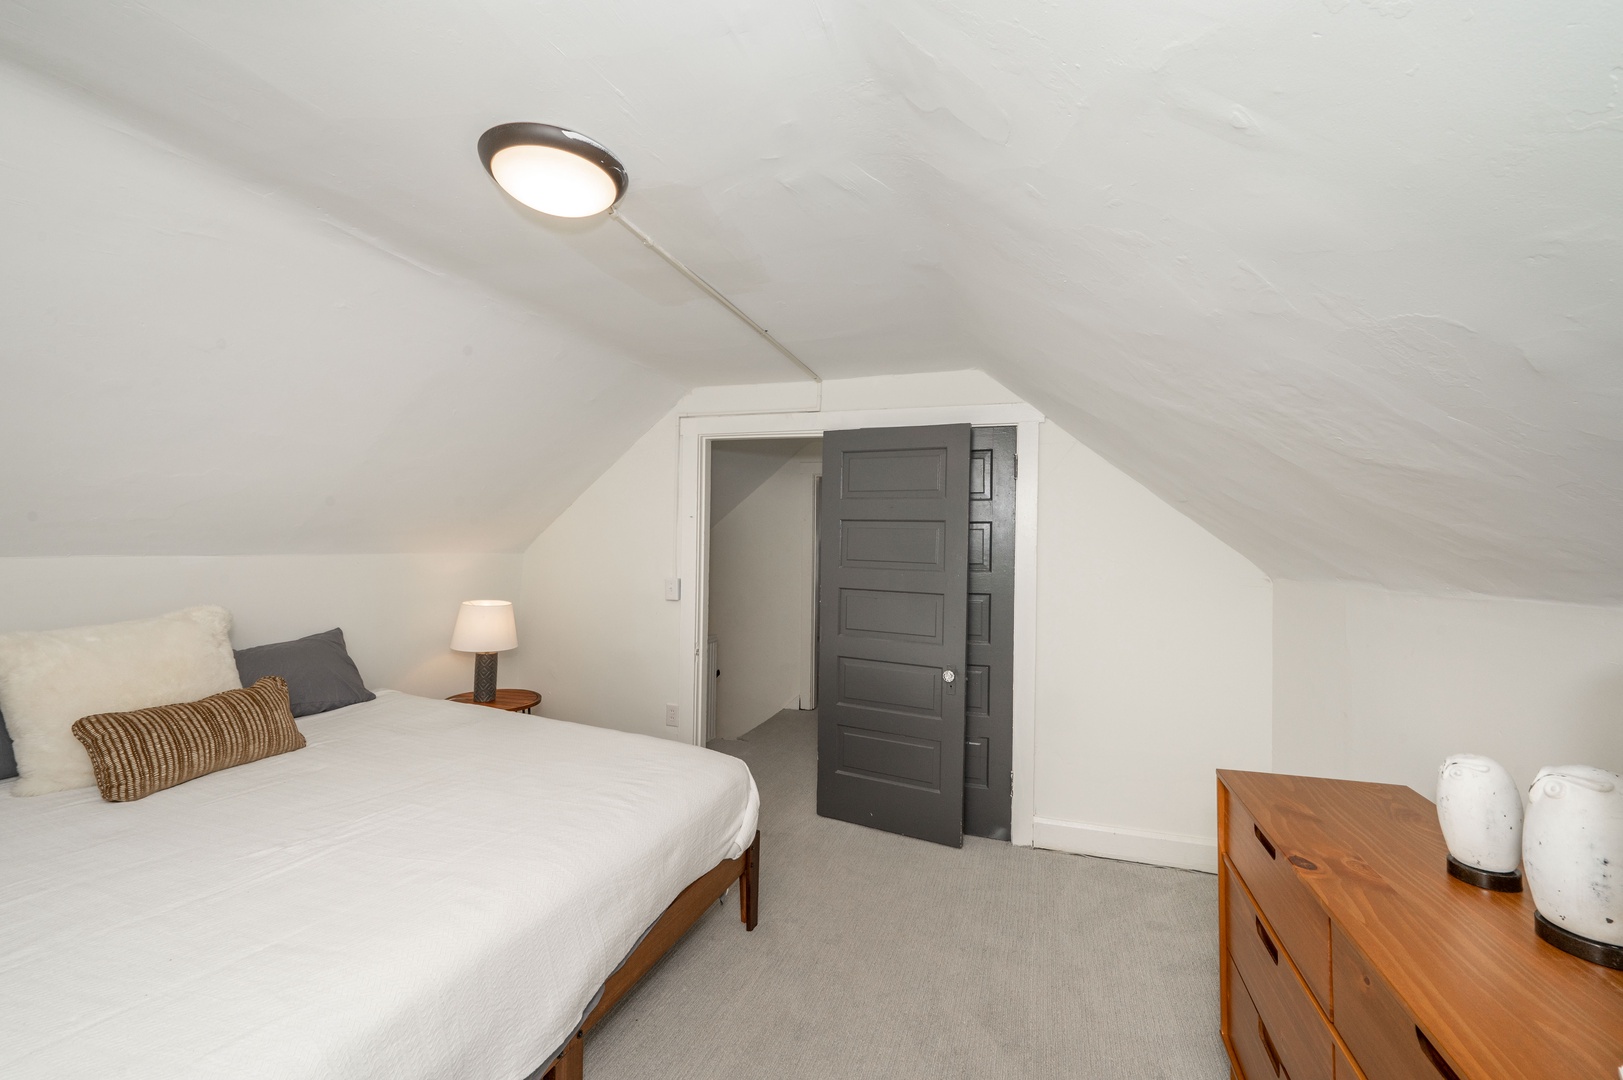 Apt 2 – The 2nd of 2 queen bedrooms, with a dresser & loads of space